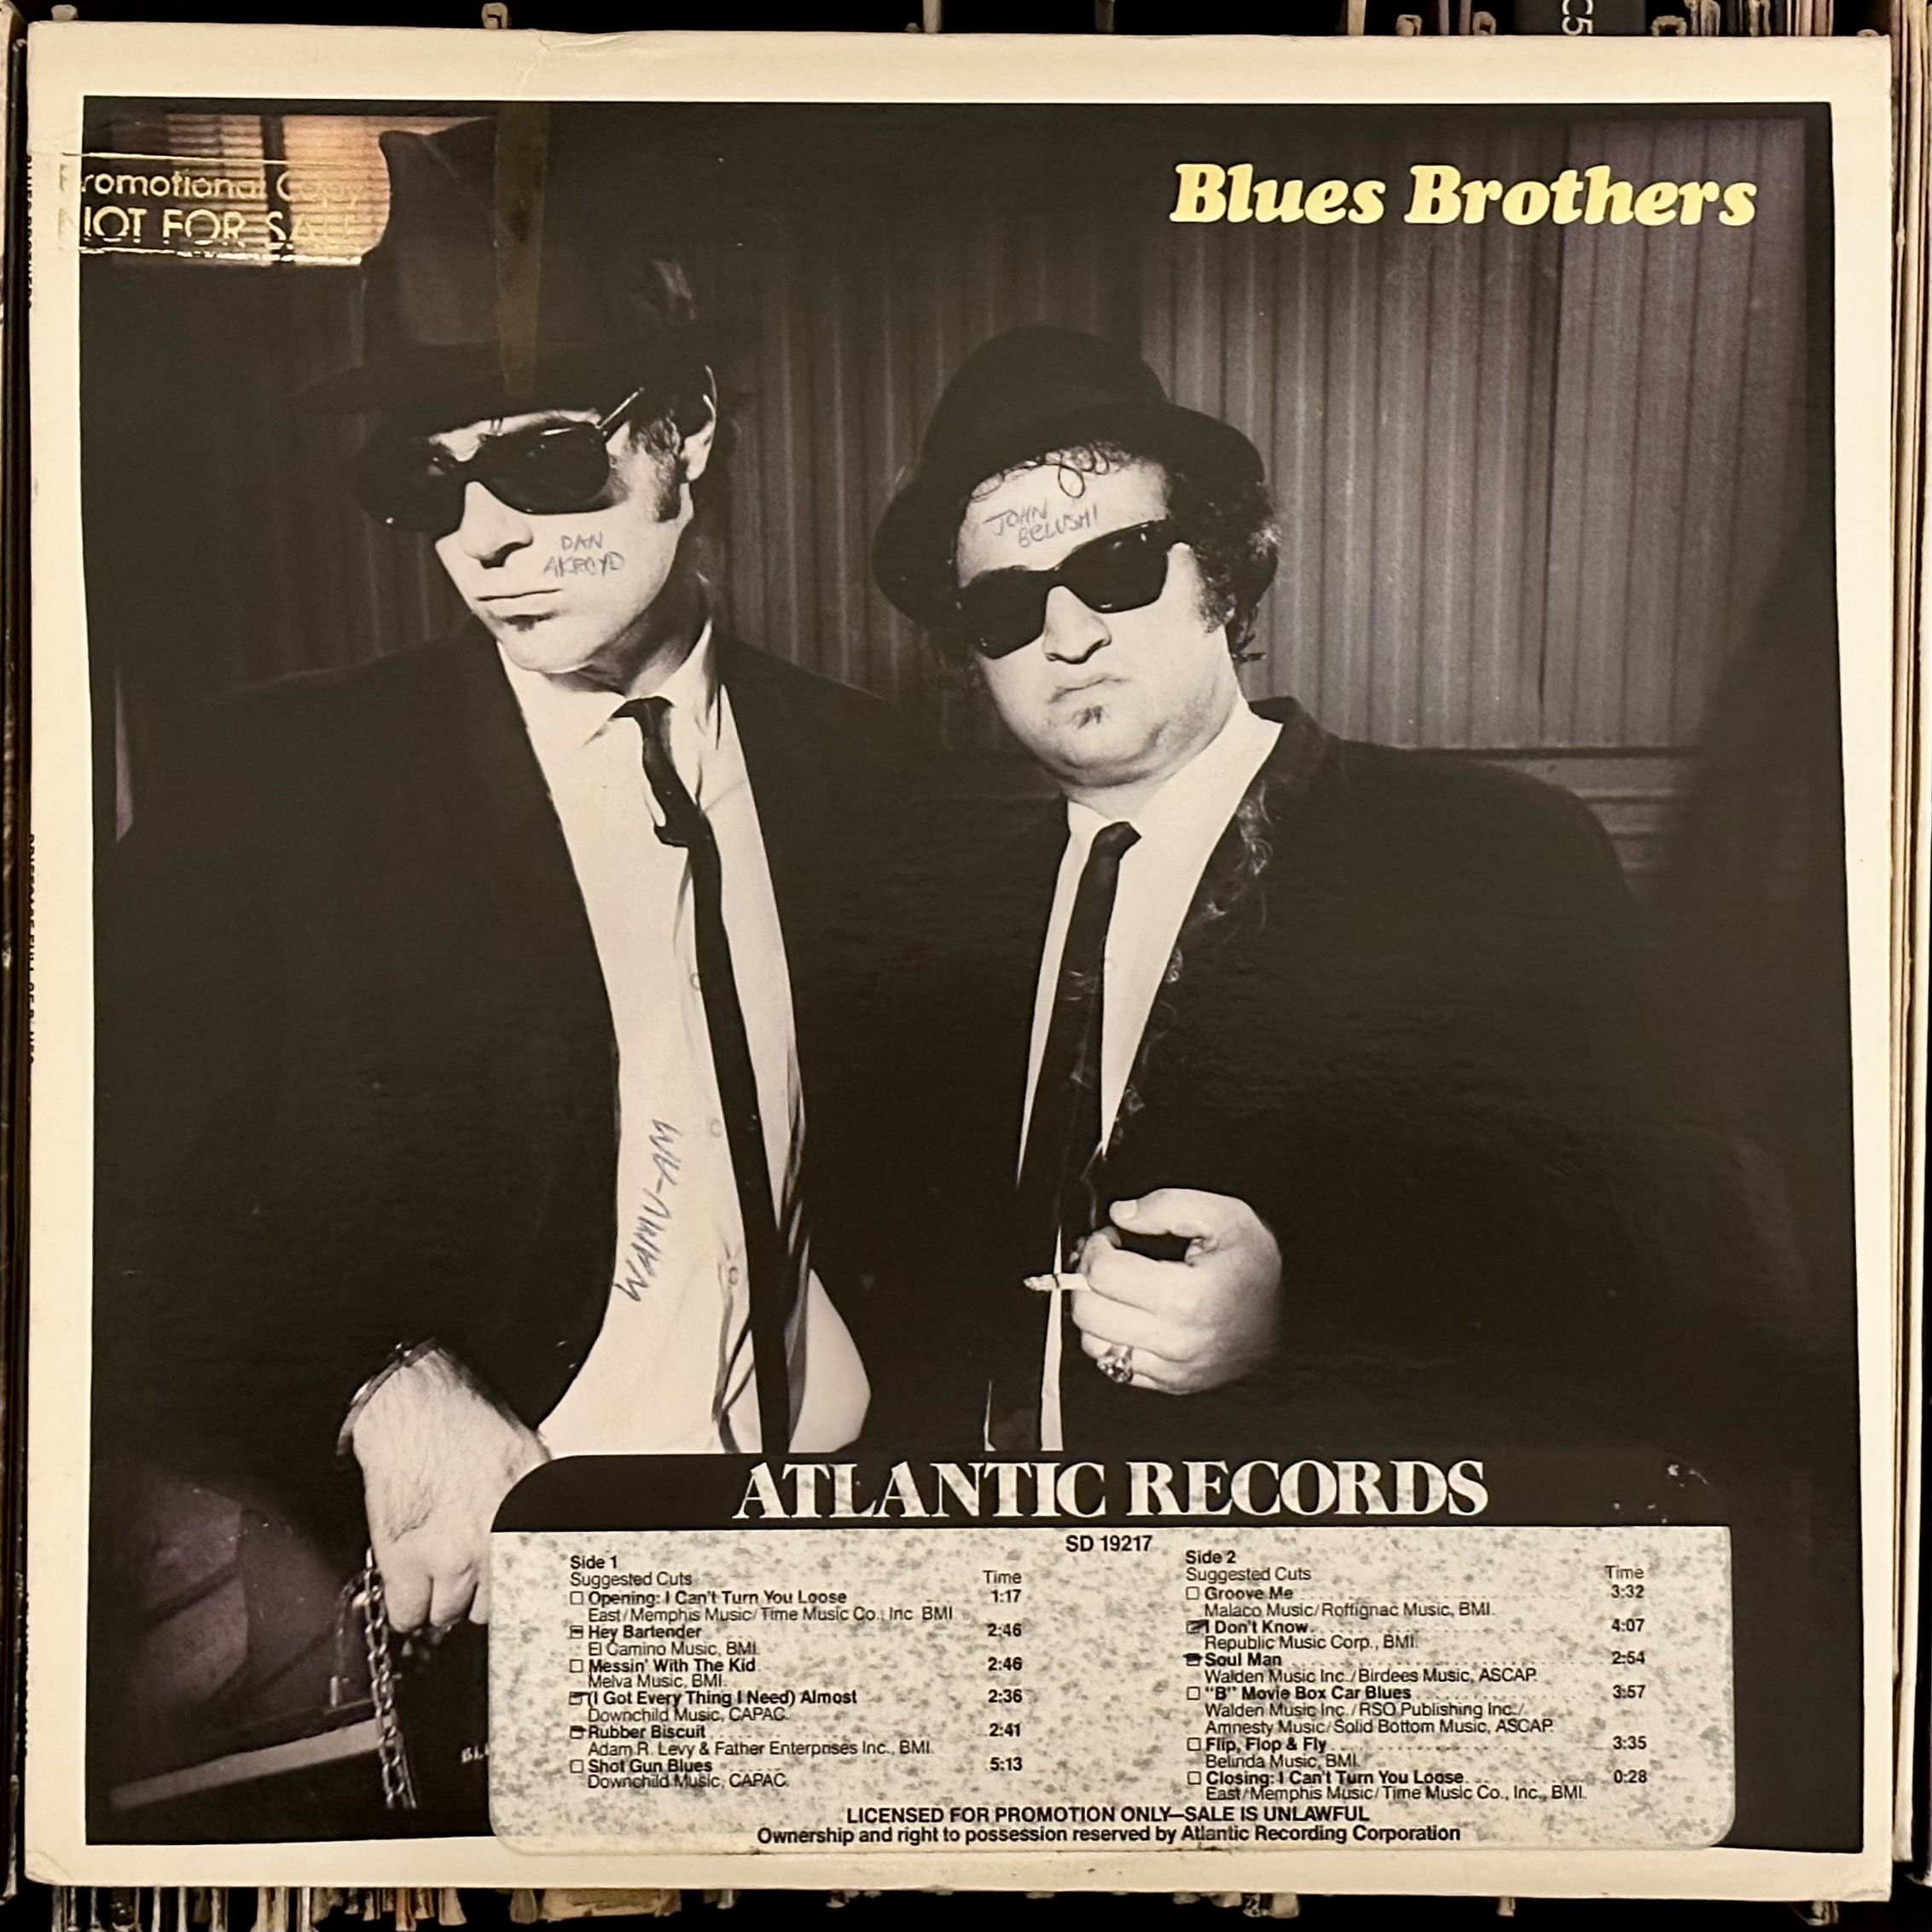 Briefcase Full of Blues by The Blues Brothers